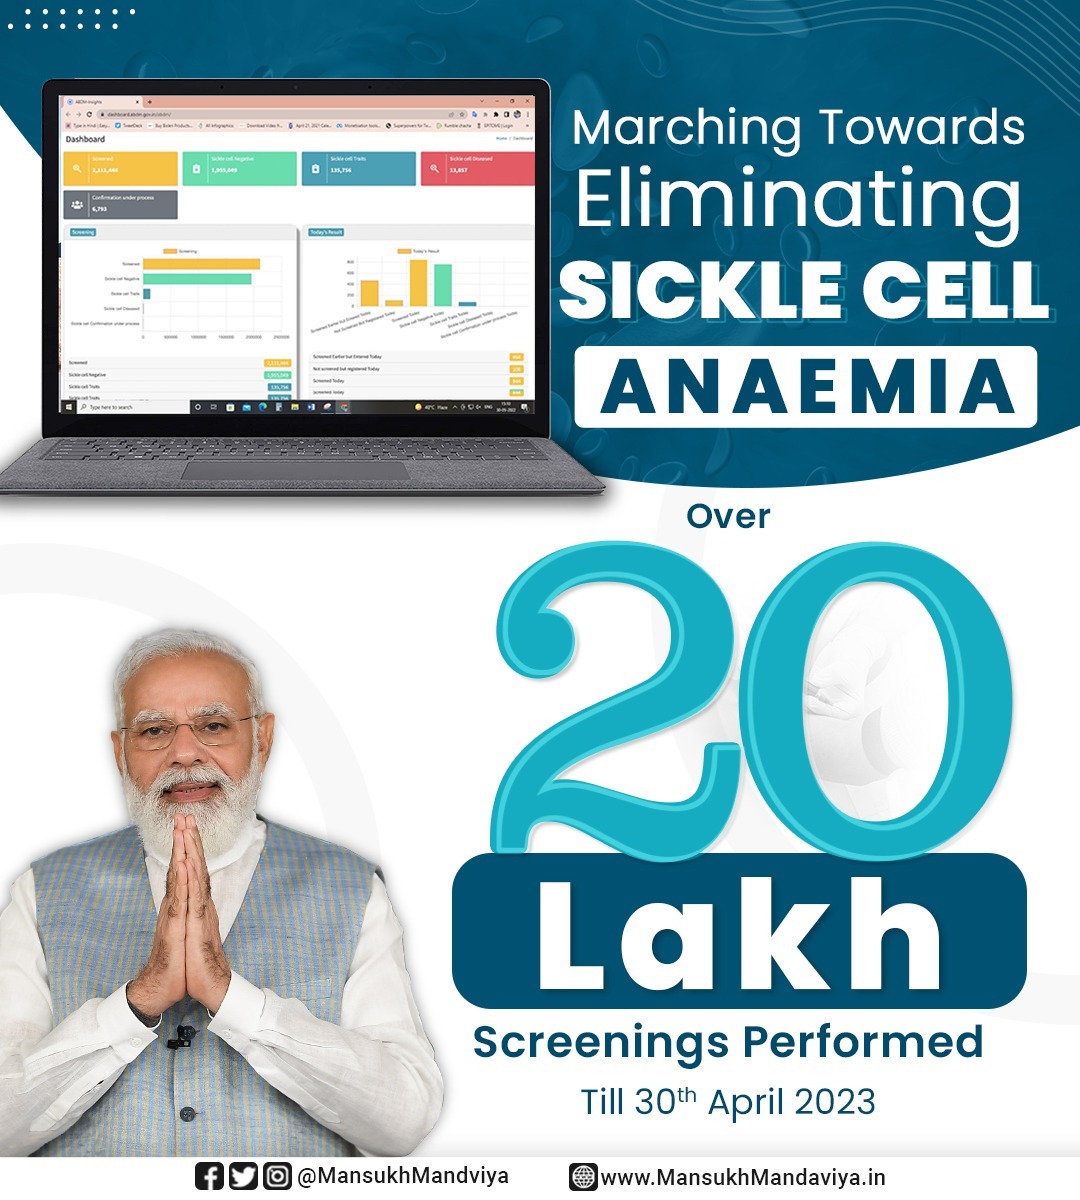 In #AmritKaalBudget, a mission to eliminate sickle cell anemia from India by 2047 was announced.

Towards this, over 20 lakh screenings have been performed so far.

We are committed to eliminating this disease of genetic blood disorder by working with the spirit of Jan Bhagidari.